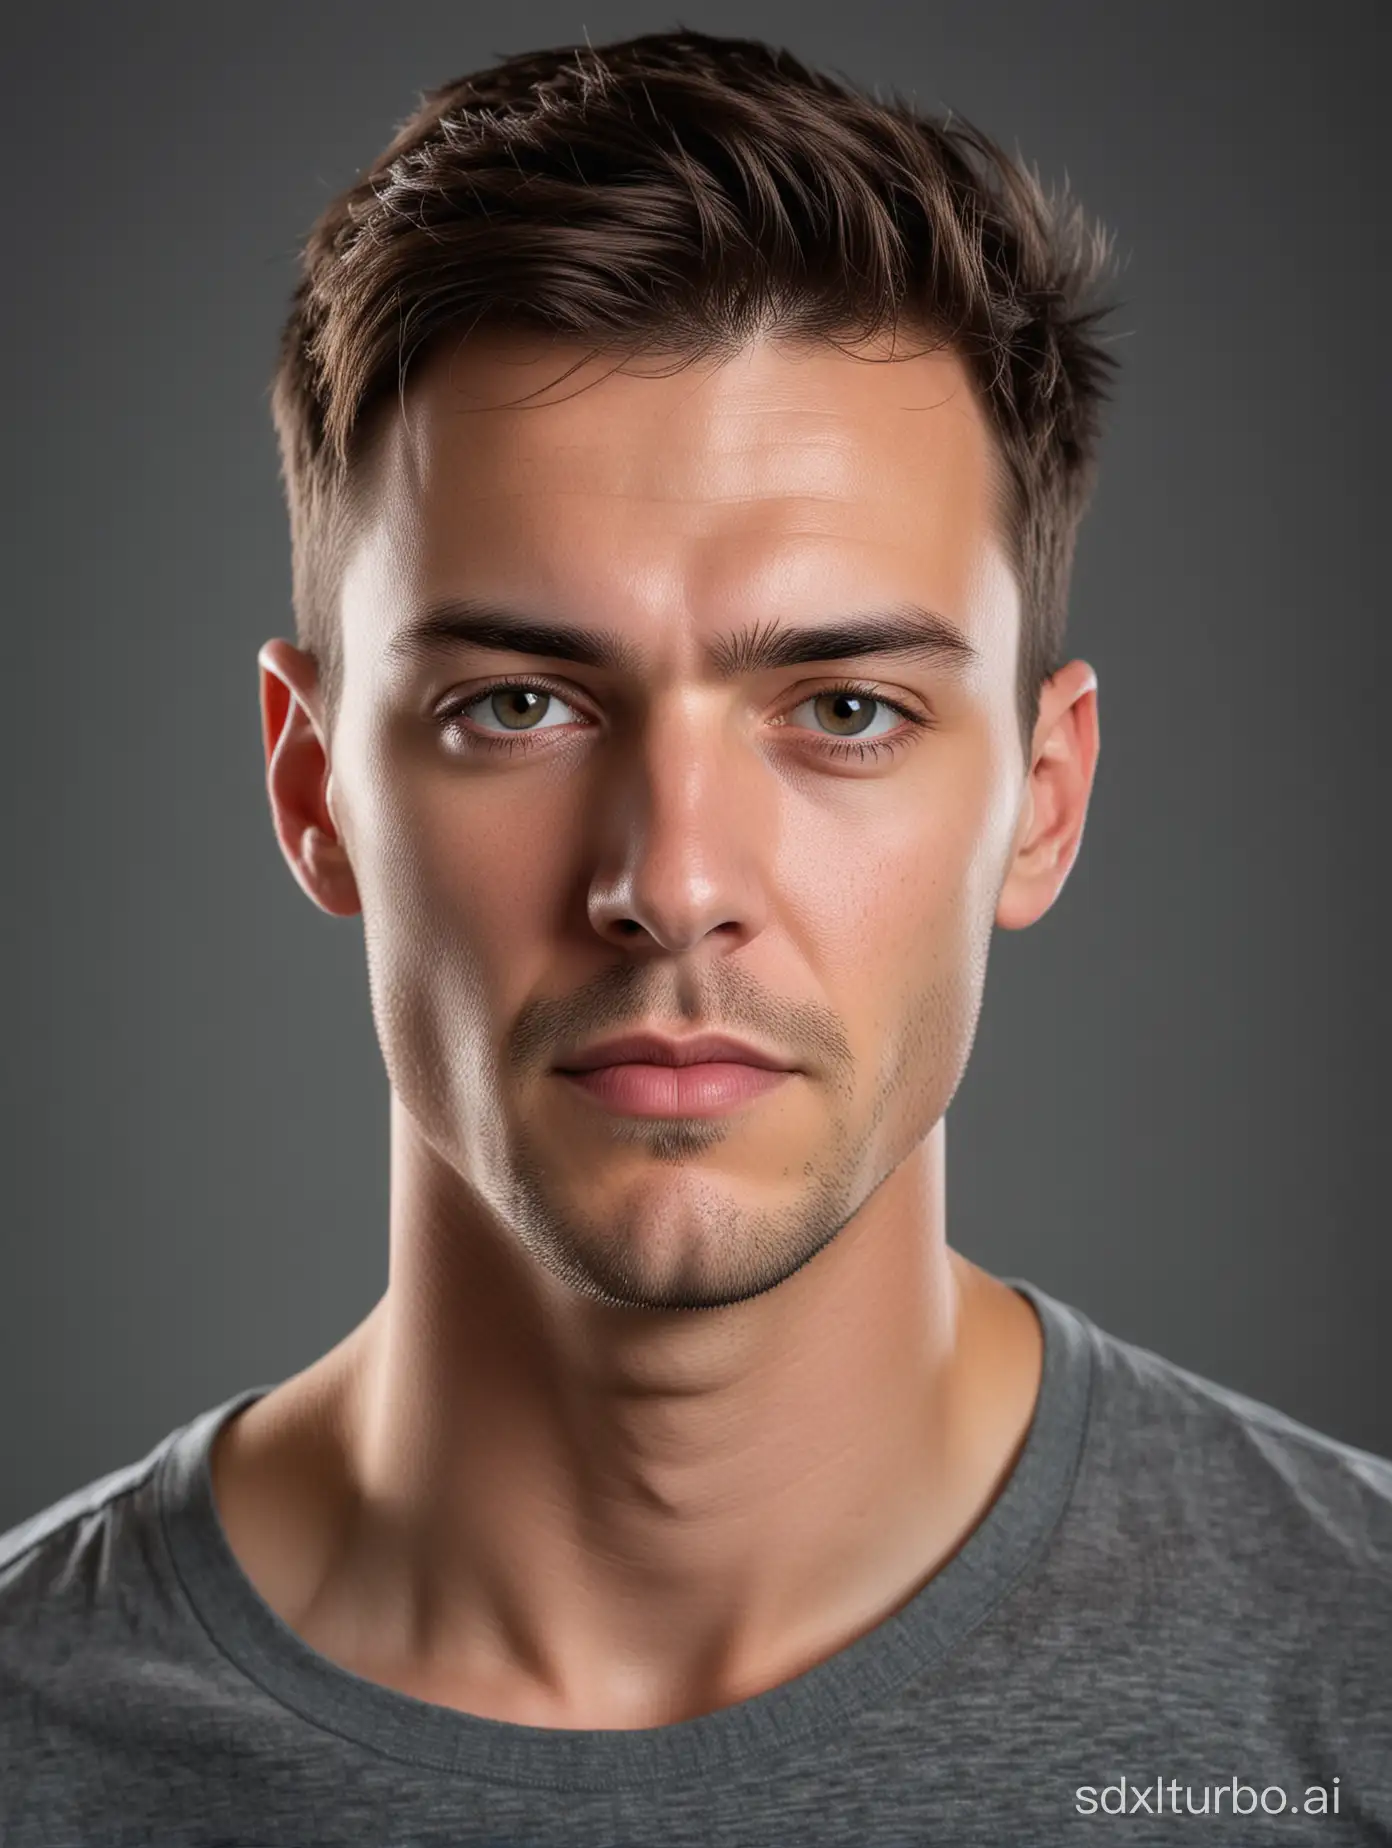 Headshot of an interesting person looking directly at the camera in flat lighting with no shadows.